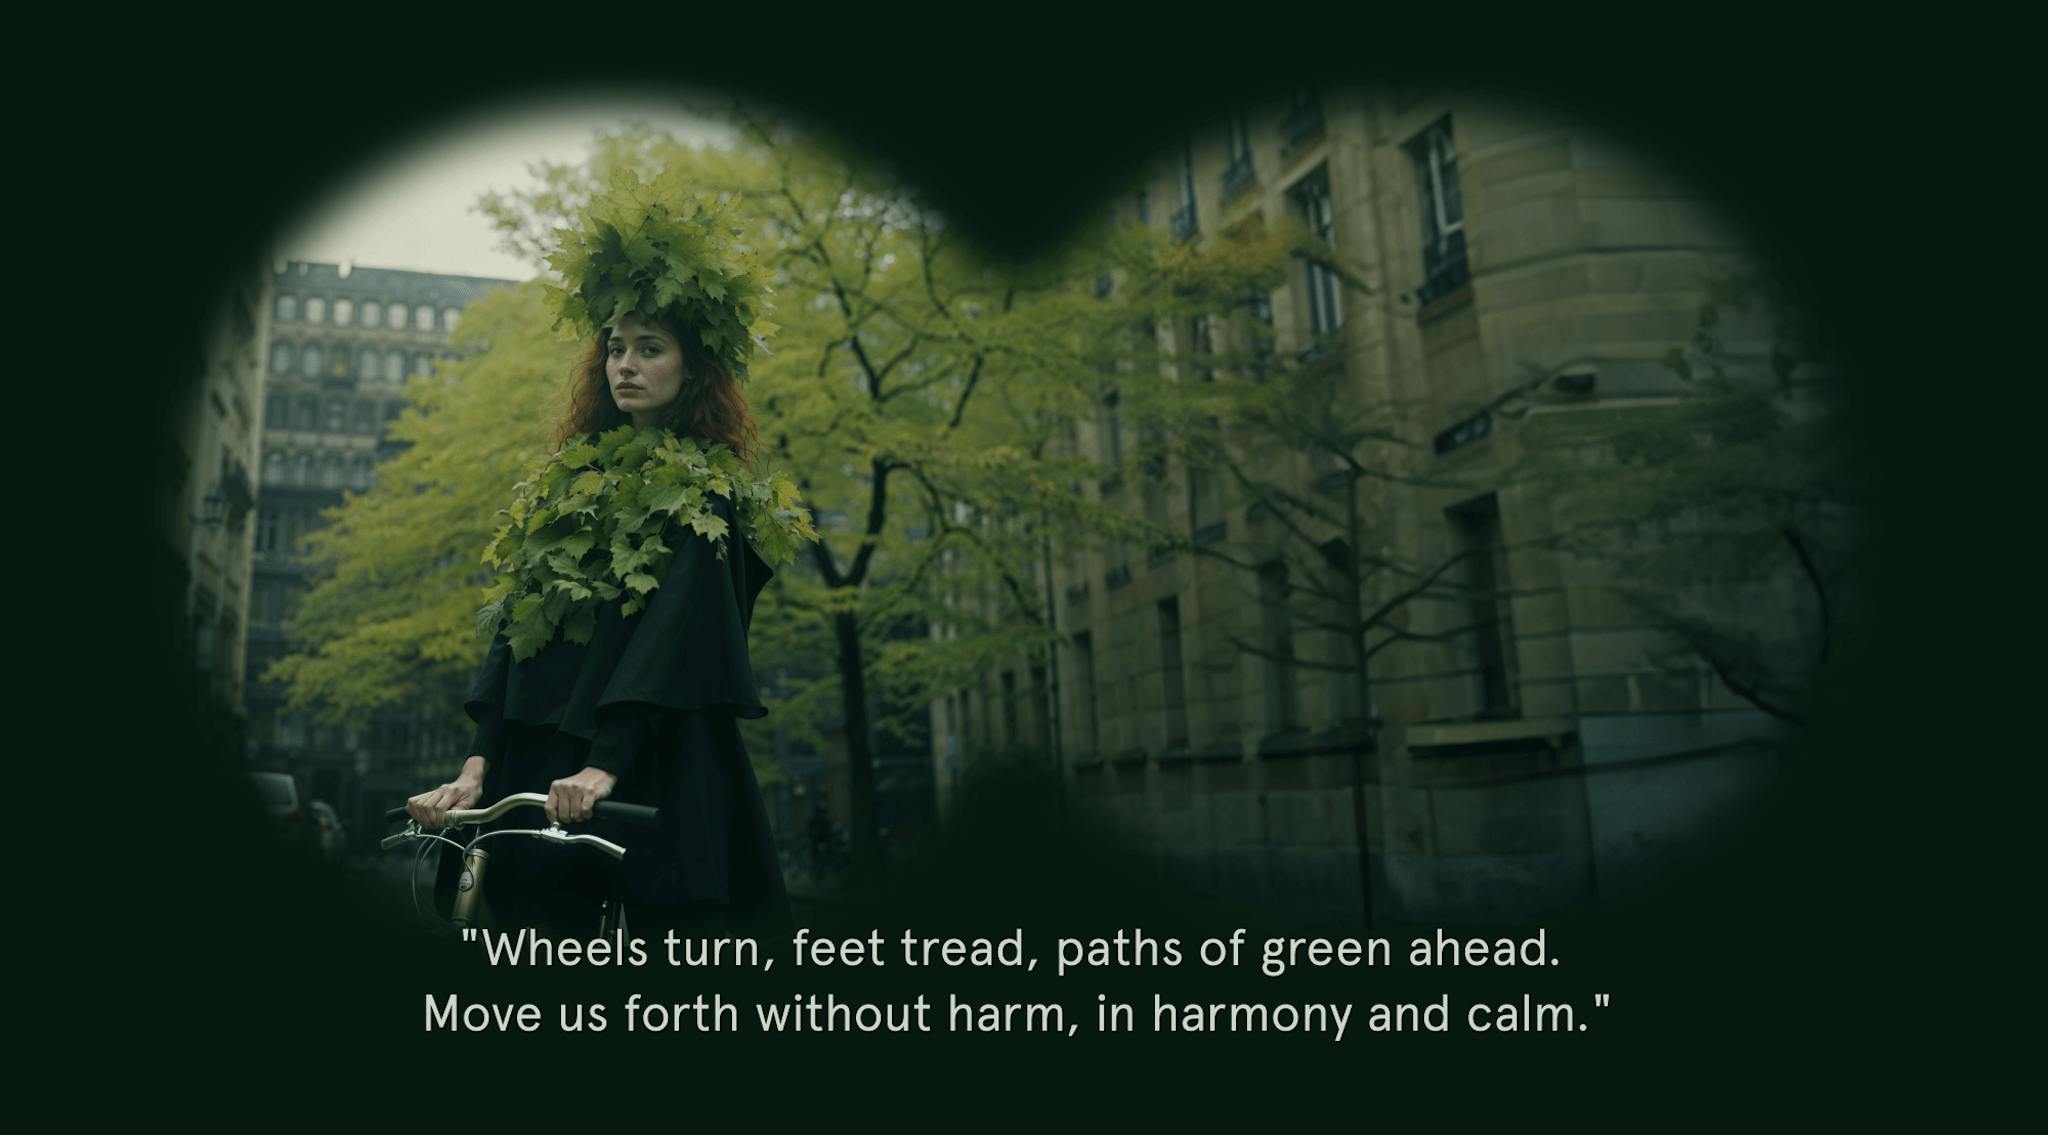 A person in the image is wearing a leafy headdress and riding a bicycle in a city, viewed through a binocular vignette with a quote: "Wheels turn, feet tread, paths of green ahead. Move us forth without harm, in harmony and calm."